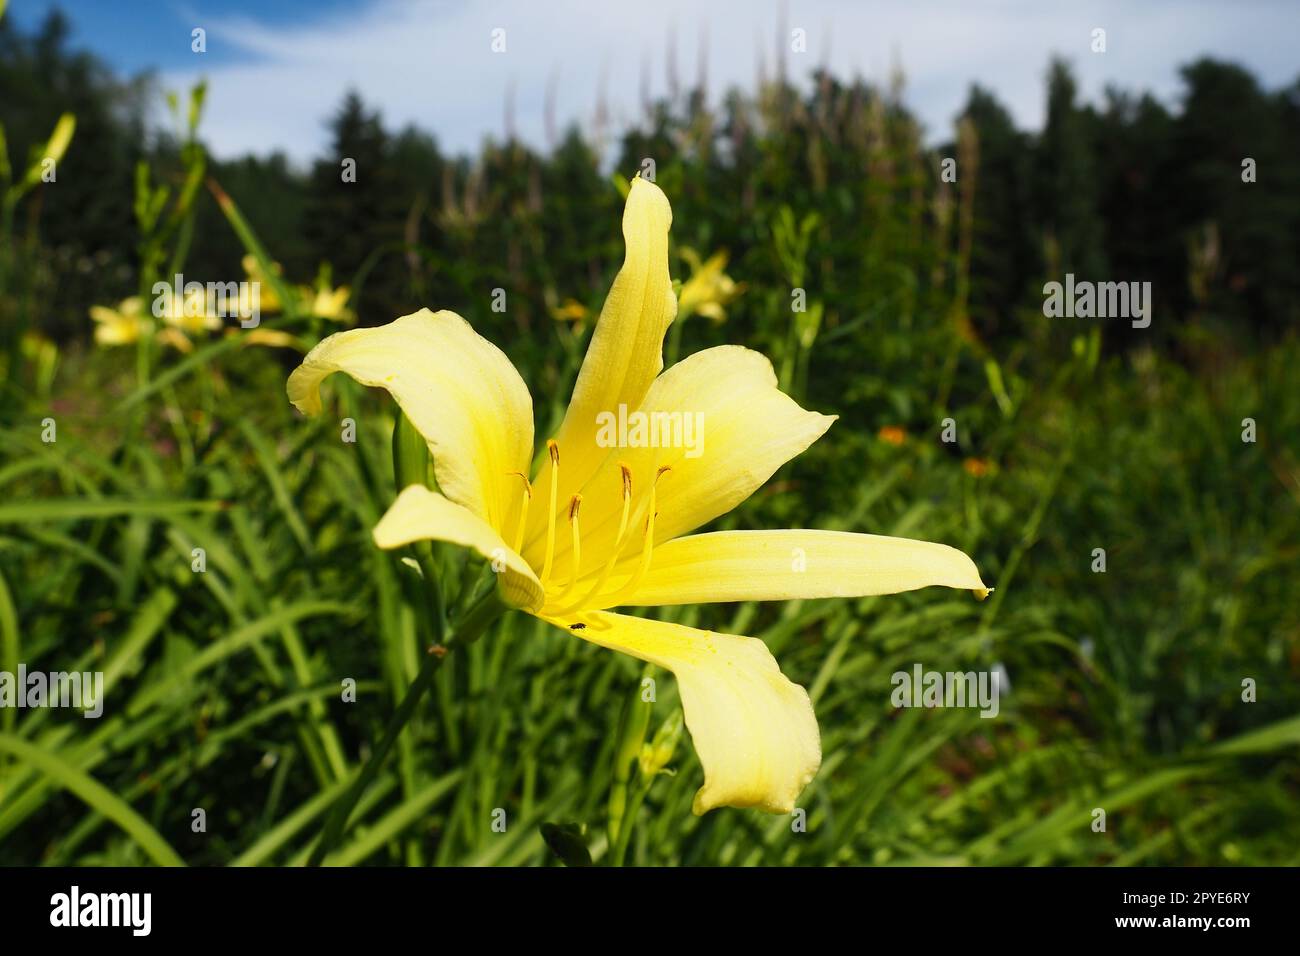 Daylily, or beautiful lemon-yellow, is a beautifully flowering perennial herbaceous plant. Long thin green leaves. Flowering as a hobby. Hemerocallis lilioasphodelus yellow variety. Stock Photo